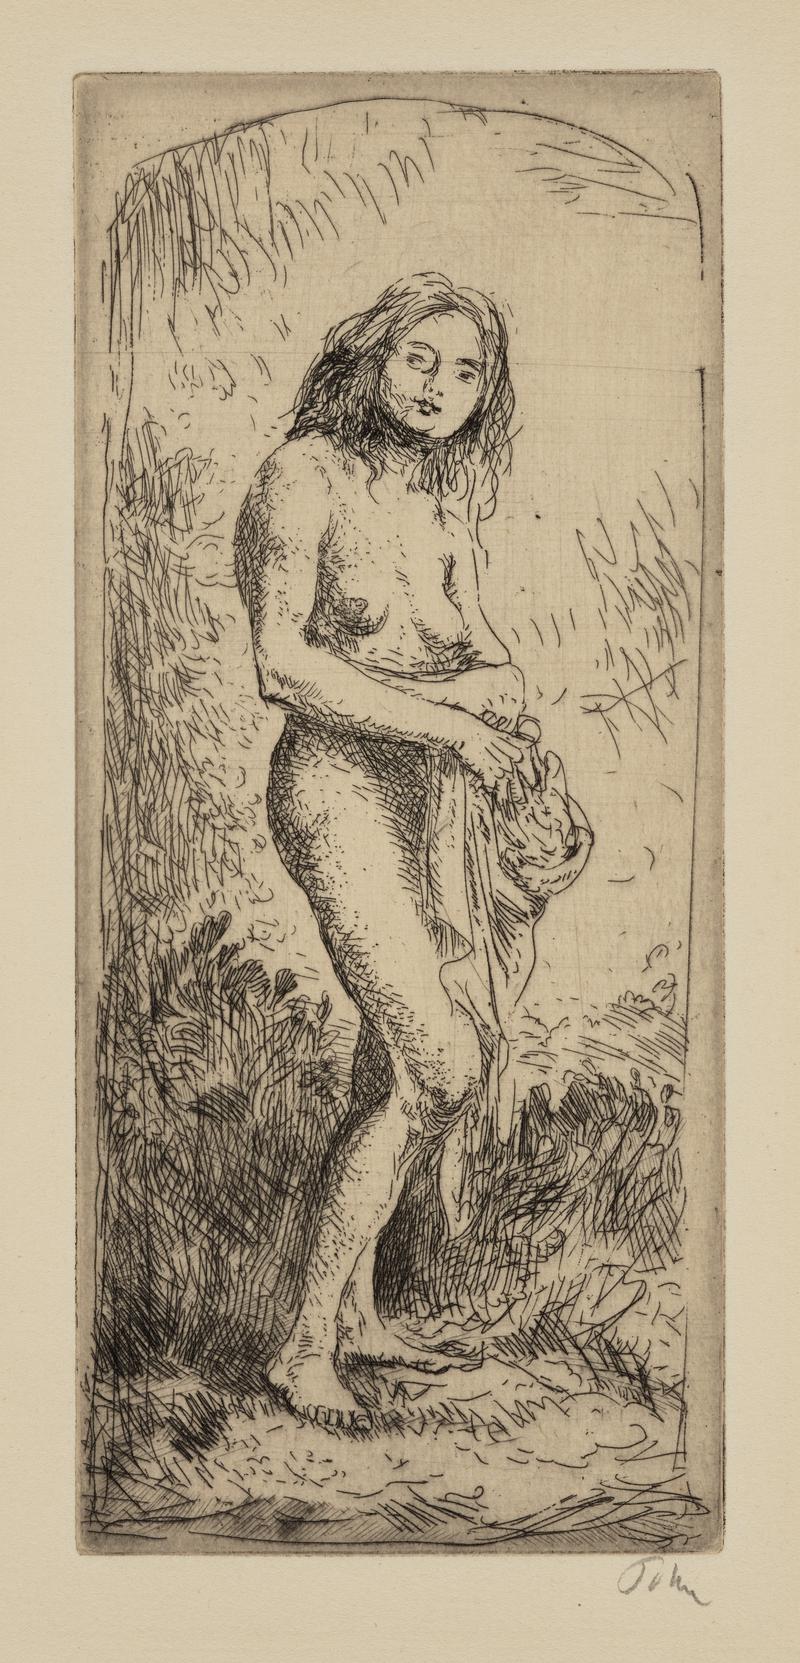 Standing Nude Woman